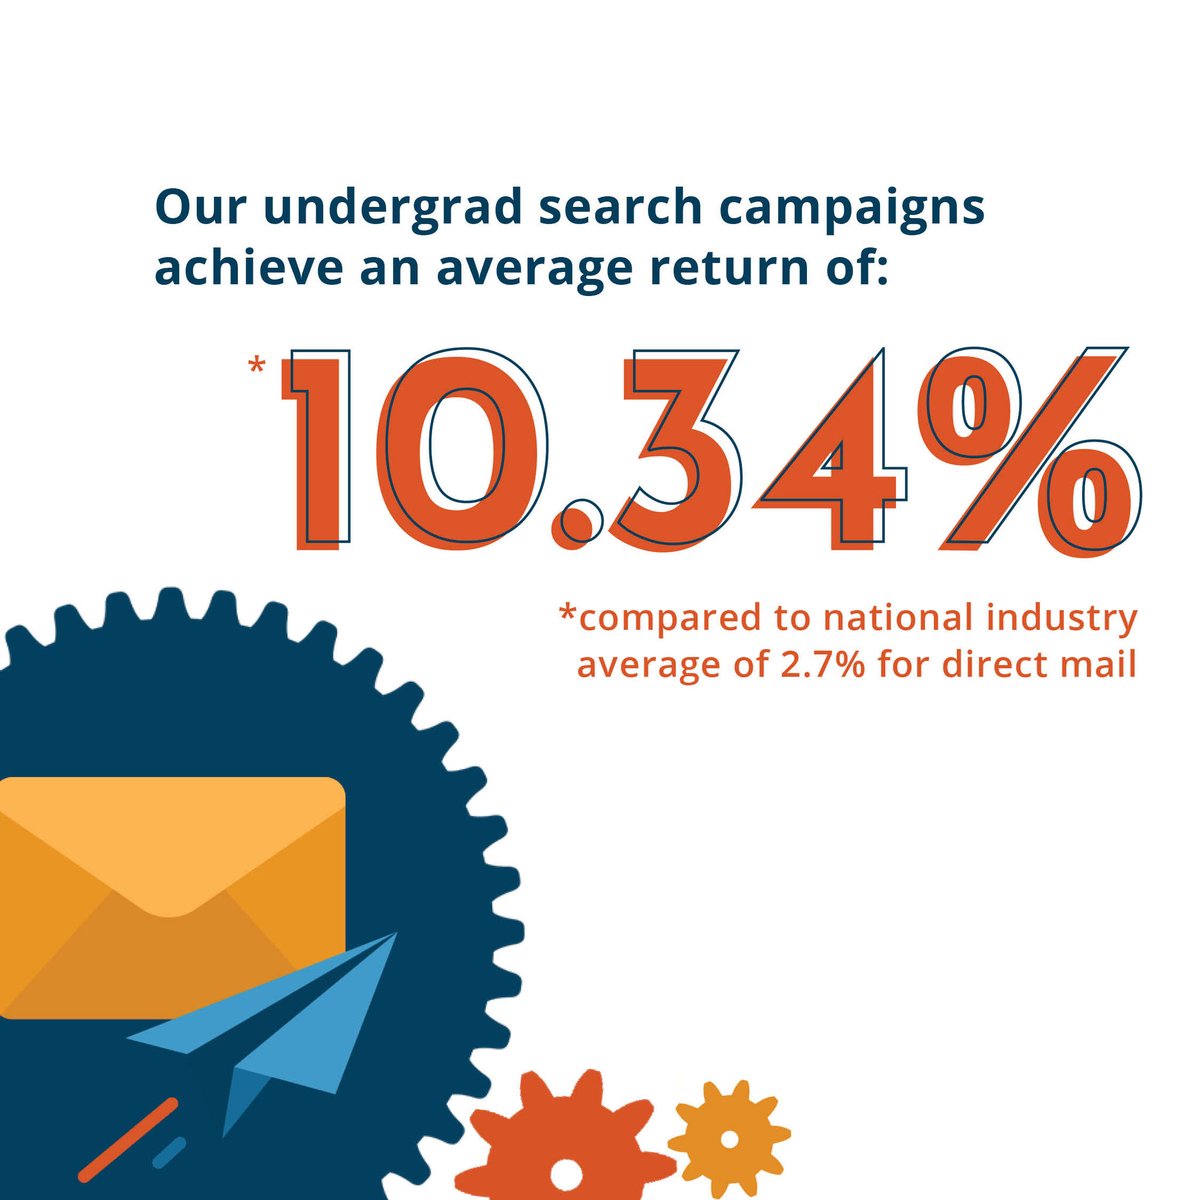 We could talk about our student search services, but the results speak for themselves.

#hemktg #highered